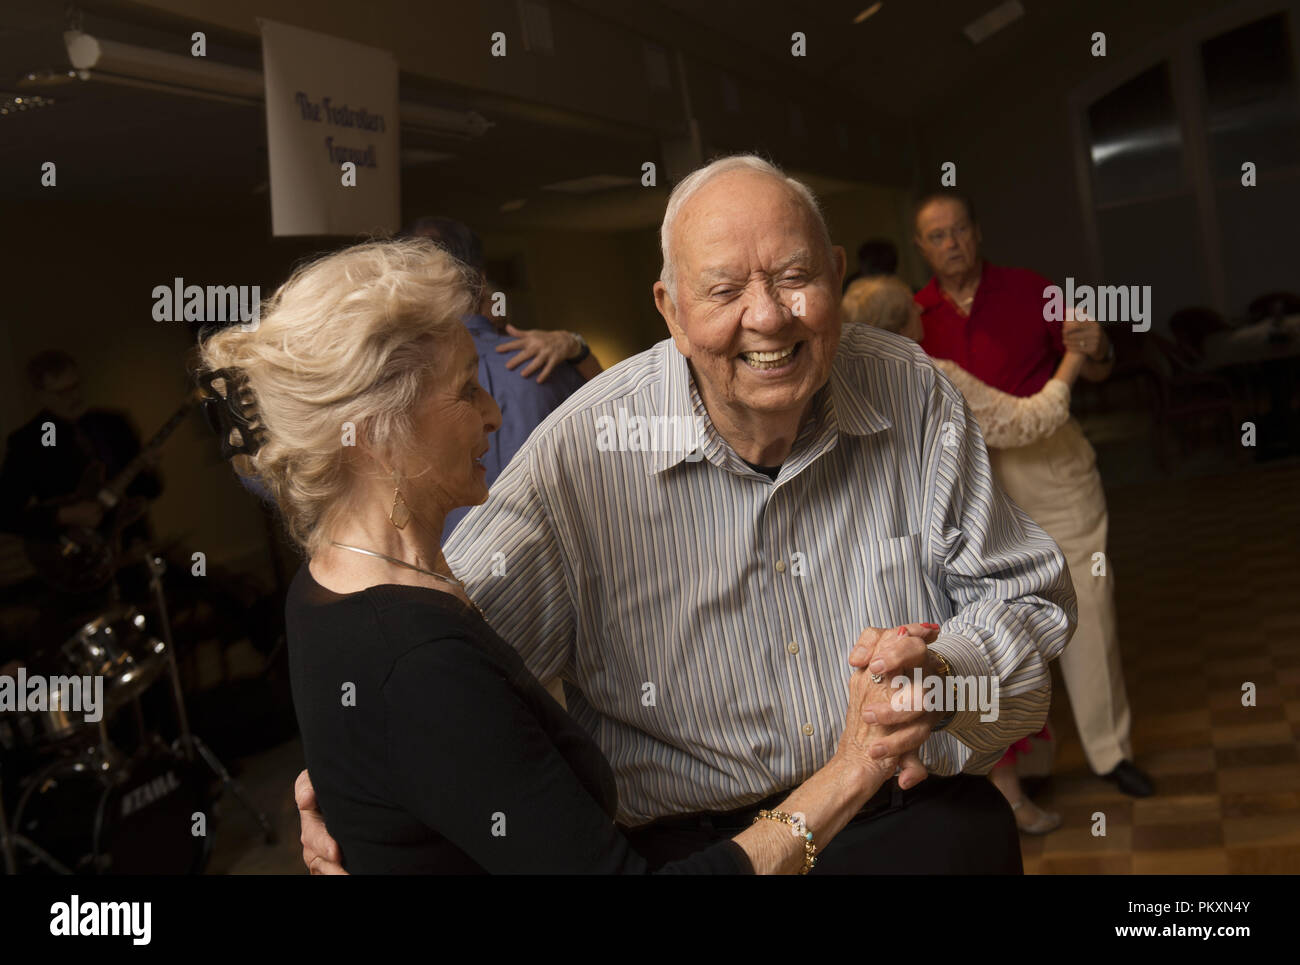 Marietta, GA, USA. 22nd June, 2018. Senior citizens known as 'The Foxtrotters' gather at county senior center for monthly dances to live music. 'It's important for seniors to get out and socialize to keeping loneliness at bay, ' notes club president Barbara Digulla. The club met every month for more than 20 years until county-mandated increases in fees caused the club to disband. Pictured:.Reuben Hernandez, 80 with Jackie Noonan Credit: Robin Rayne Nelson/ZUMA Wire/Alamy Live News Stock Photo